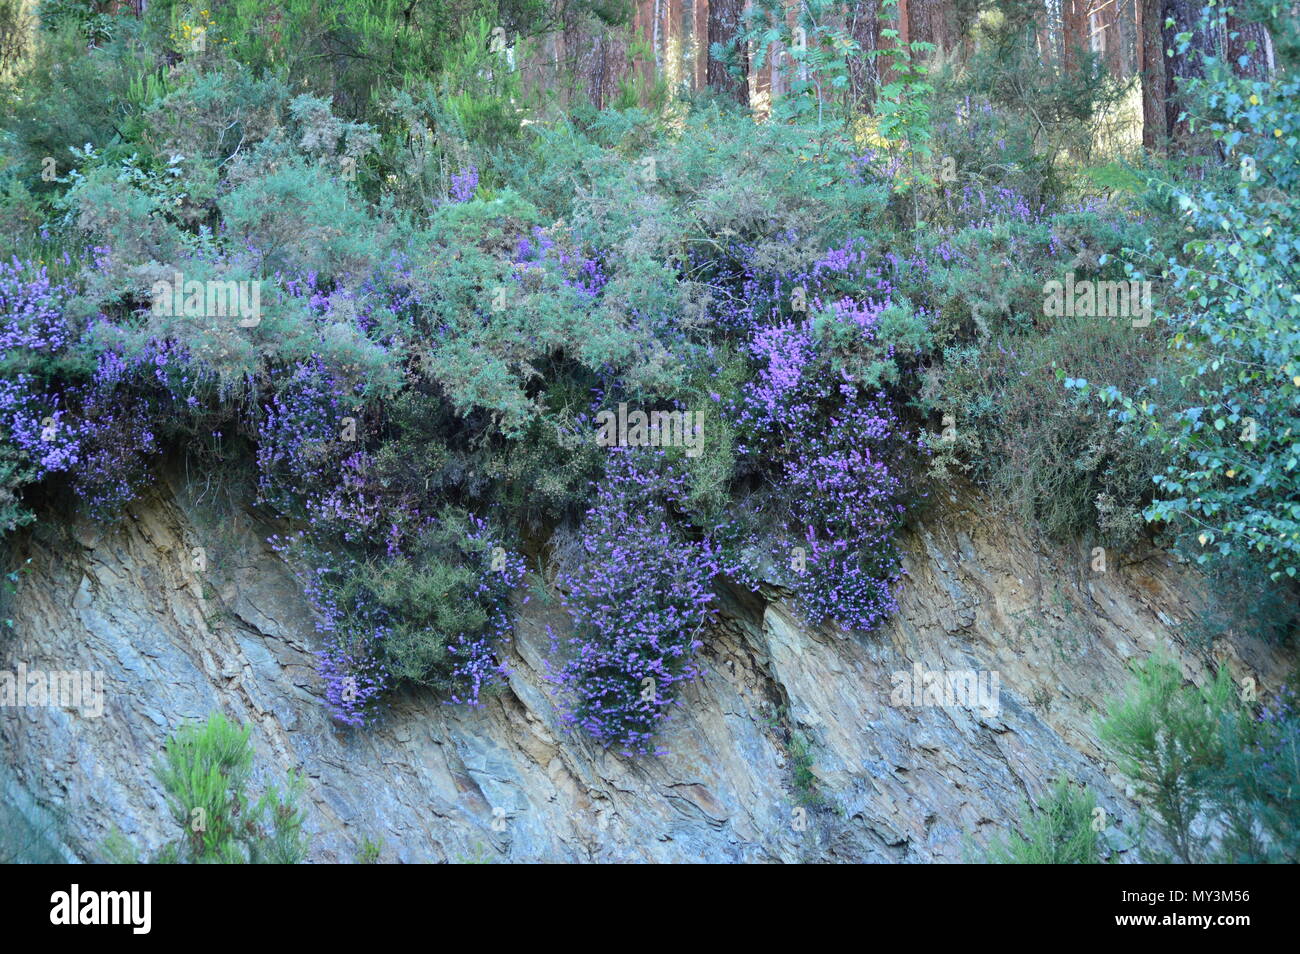 Violet Flowers Inside A Eucalyptus Forest In The Meadows Of The Mountains Of Galicia. Travel Flowers Nature. August 18, 2016. Rebedul, Becerrea Lugo G Stock Photo